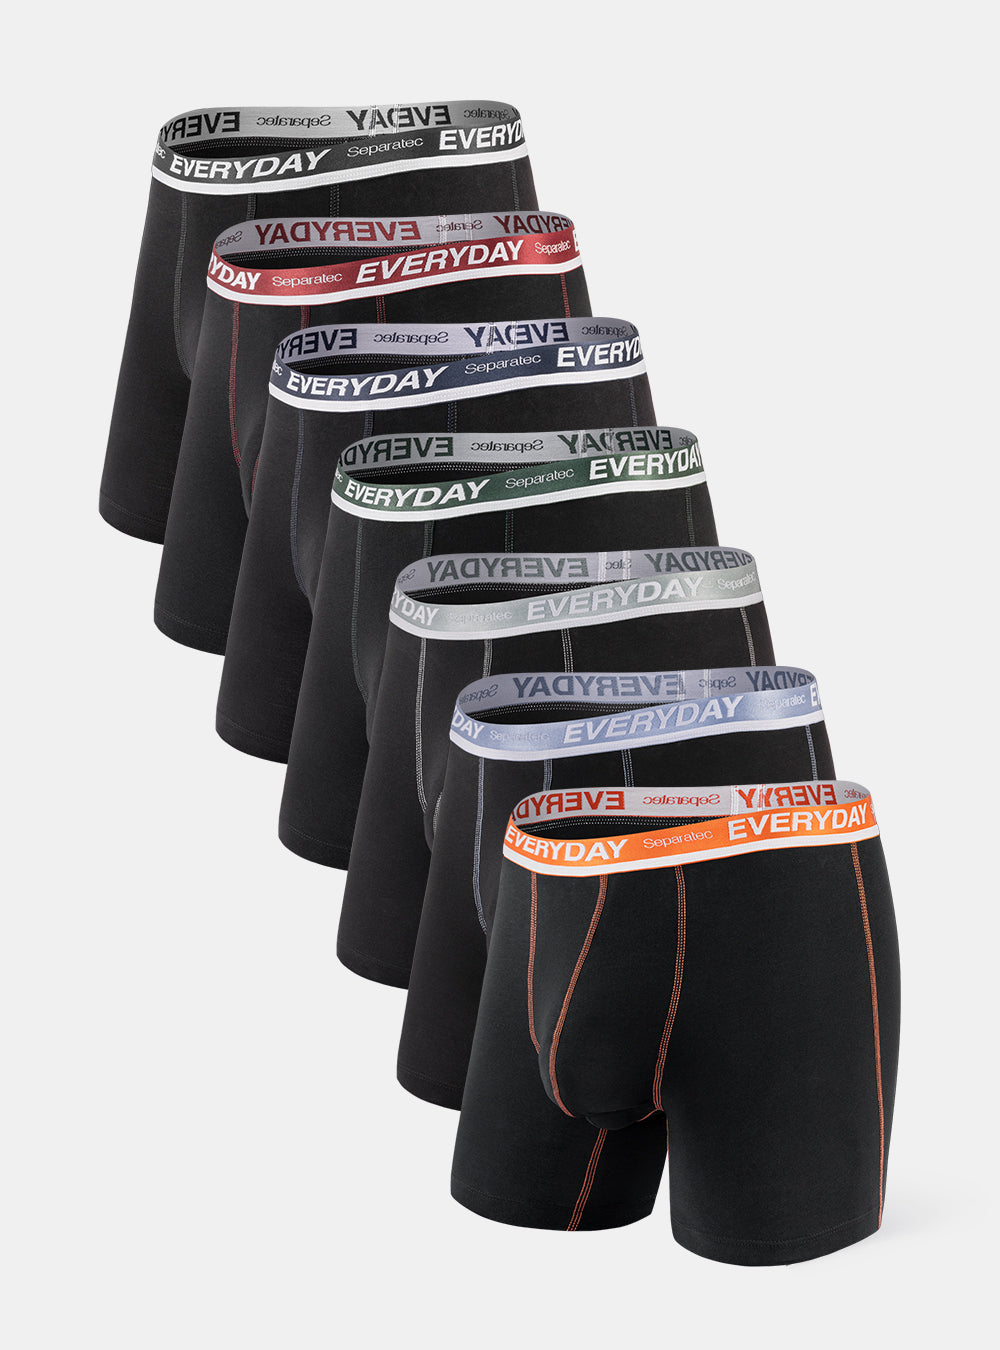 Cotton Colorful Everyday Boxer Briefs 7 Pack